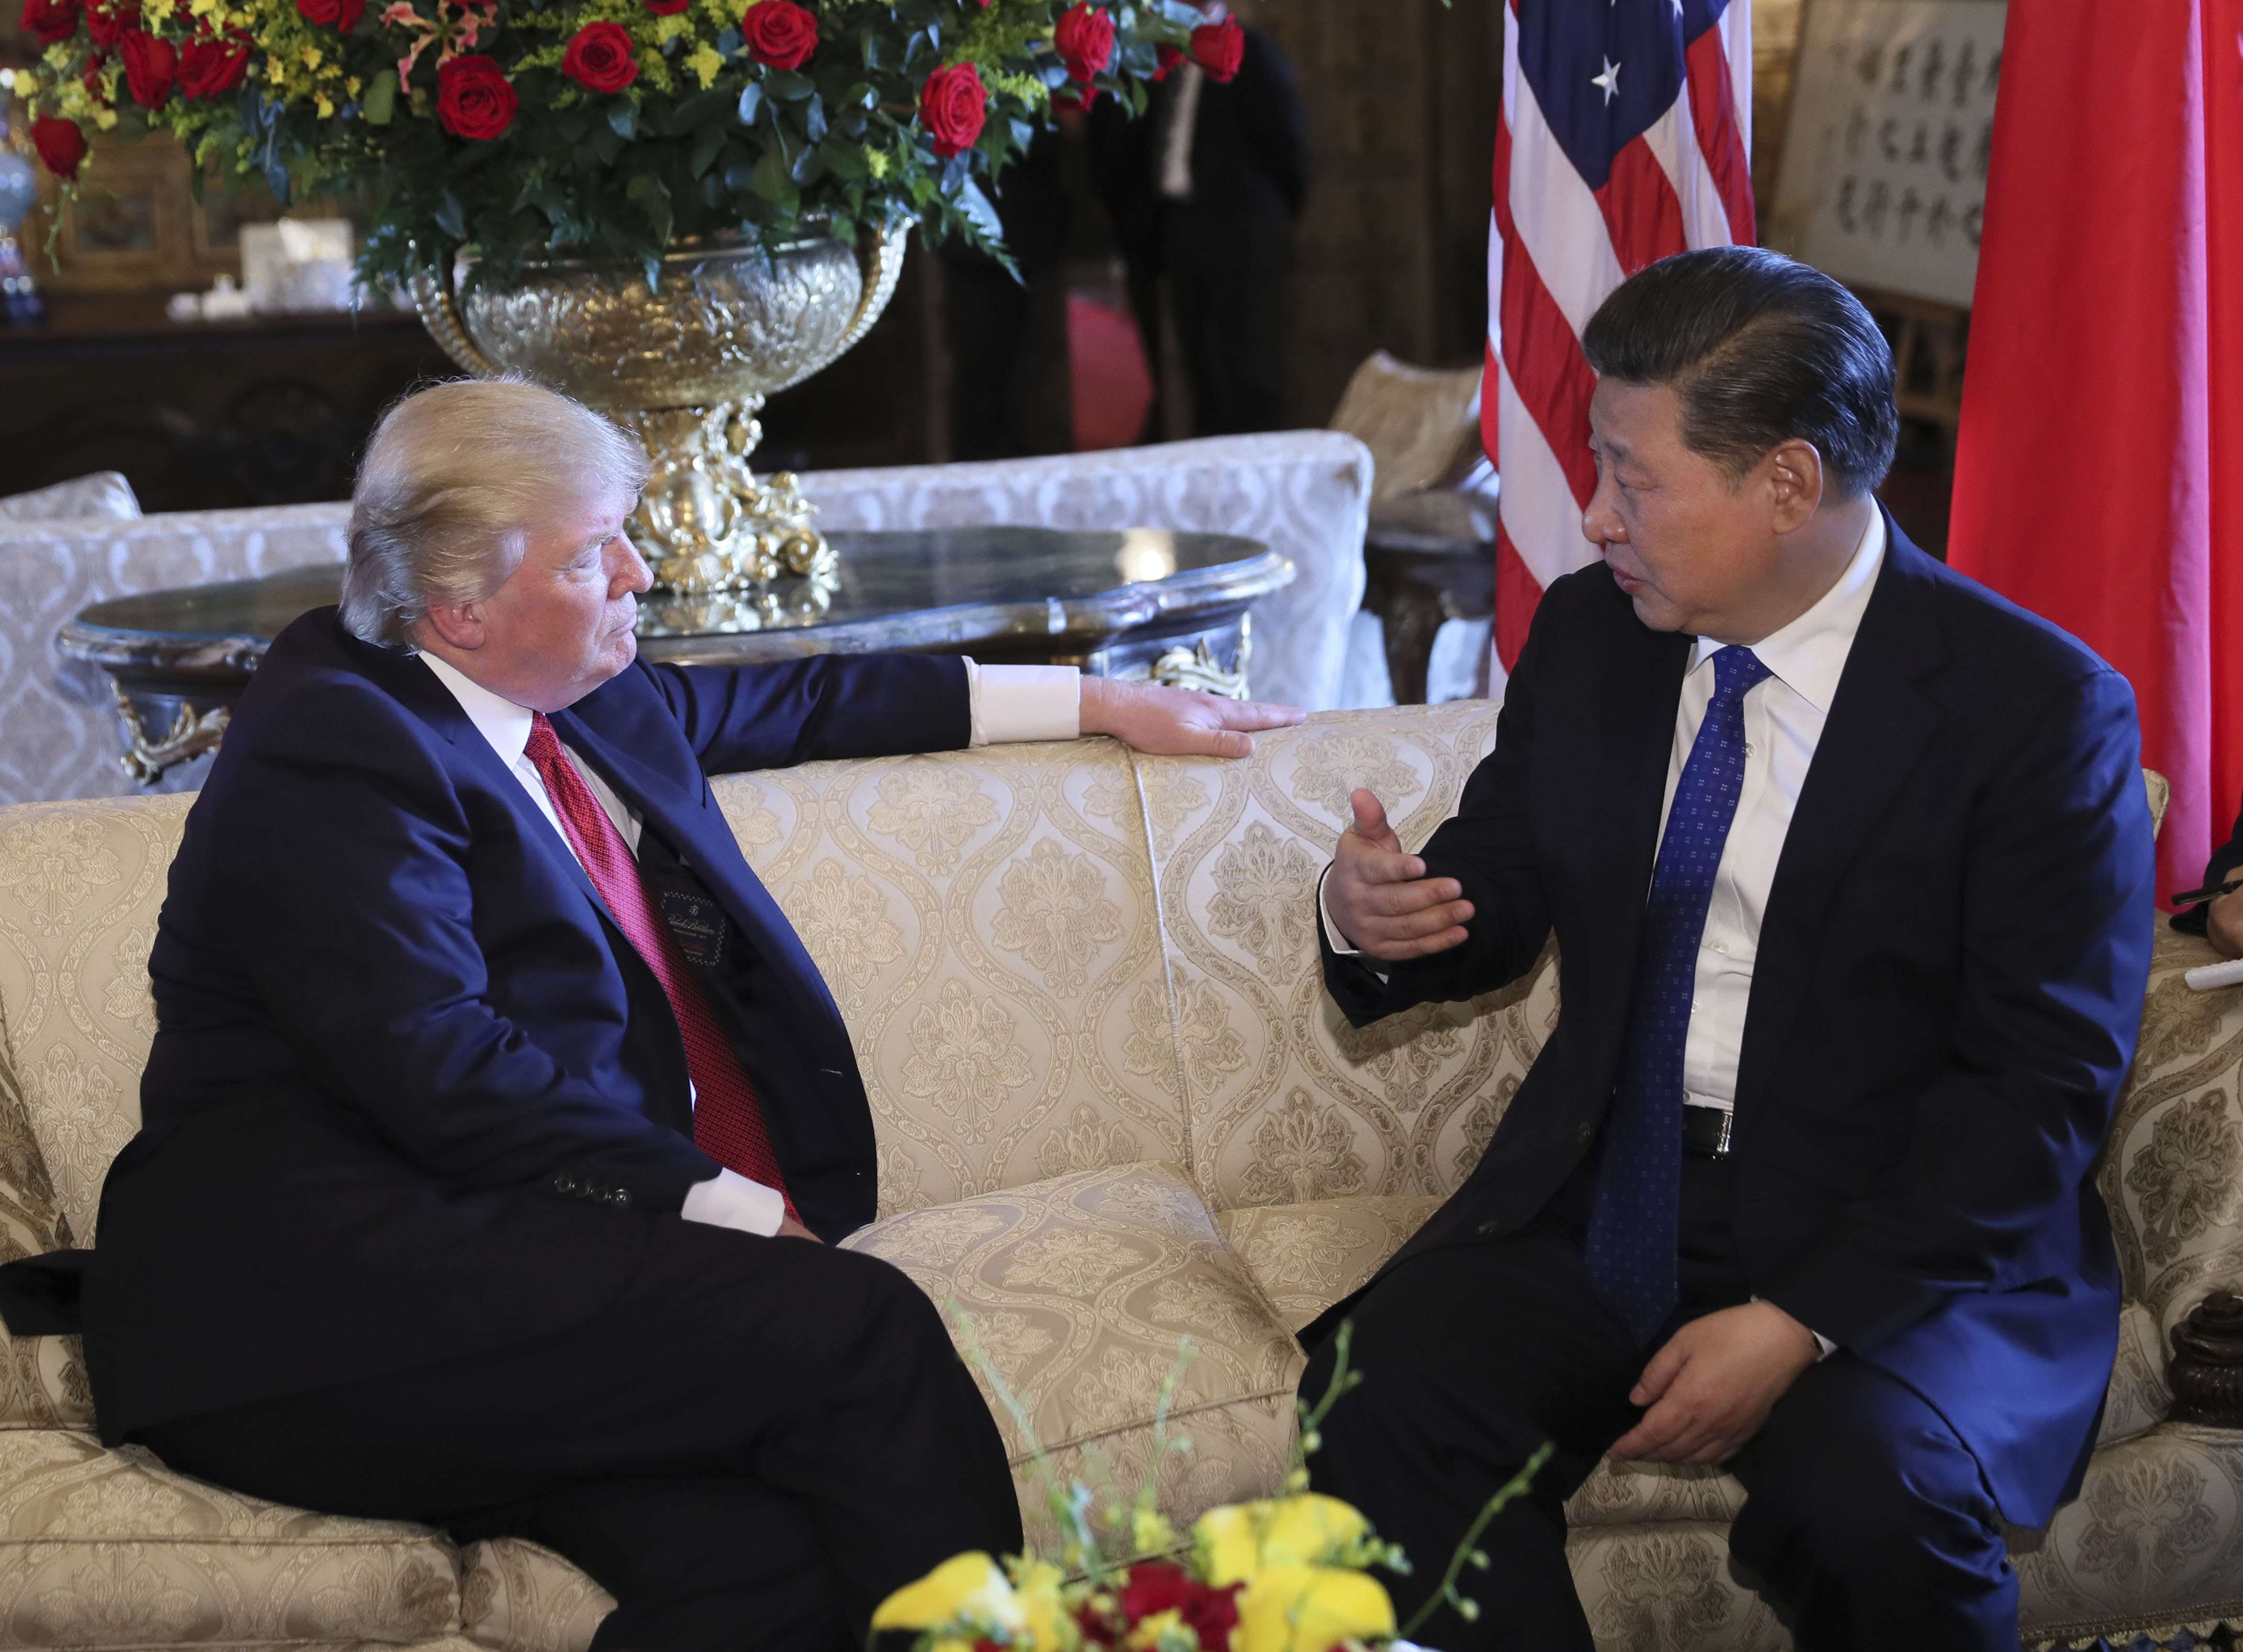 Donald Trump and Xi Jinping at the Mar-a-Lago estate, after a series of meetings in which the US president said “goodwill and friendship was formed”. Photo: Xinhua